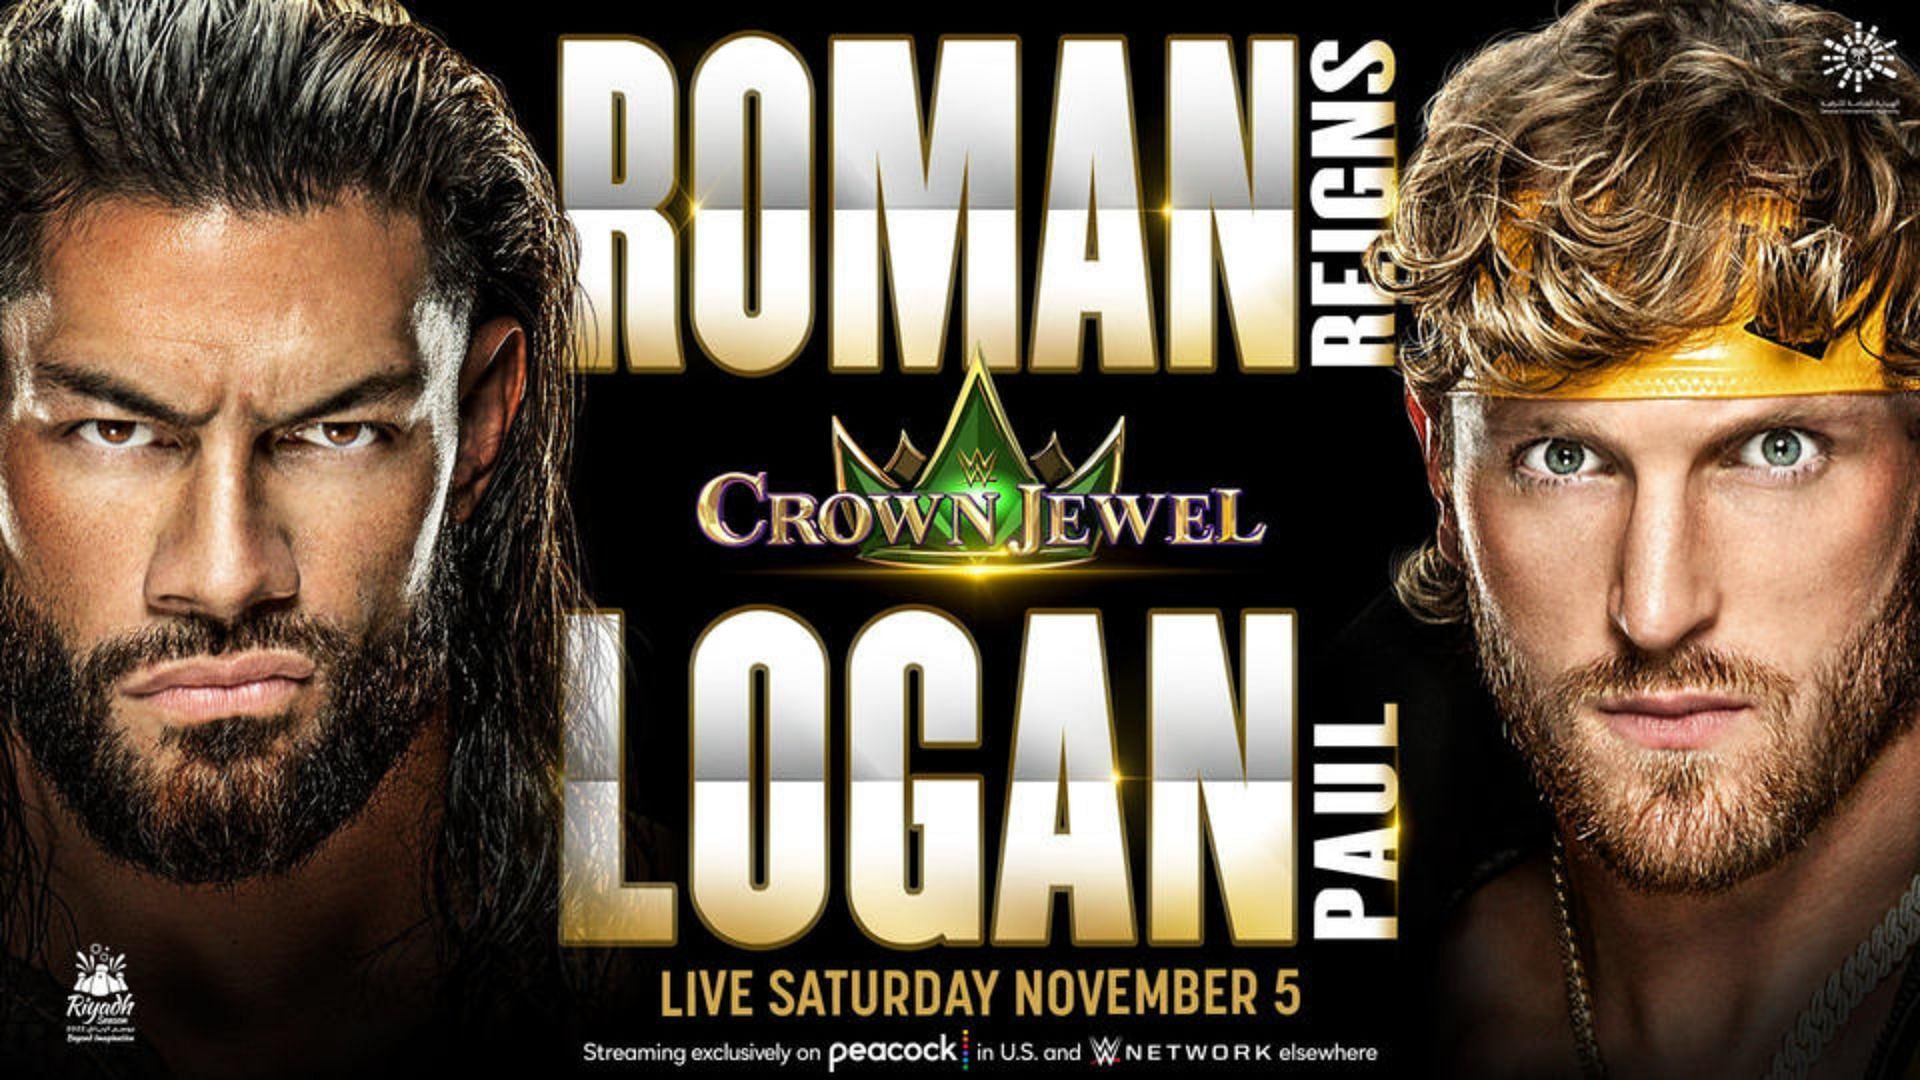 Roman Reigns will defend the Undisputed WWE Universal Championship against Logan Paul this Saturday